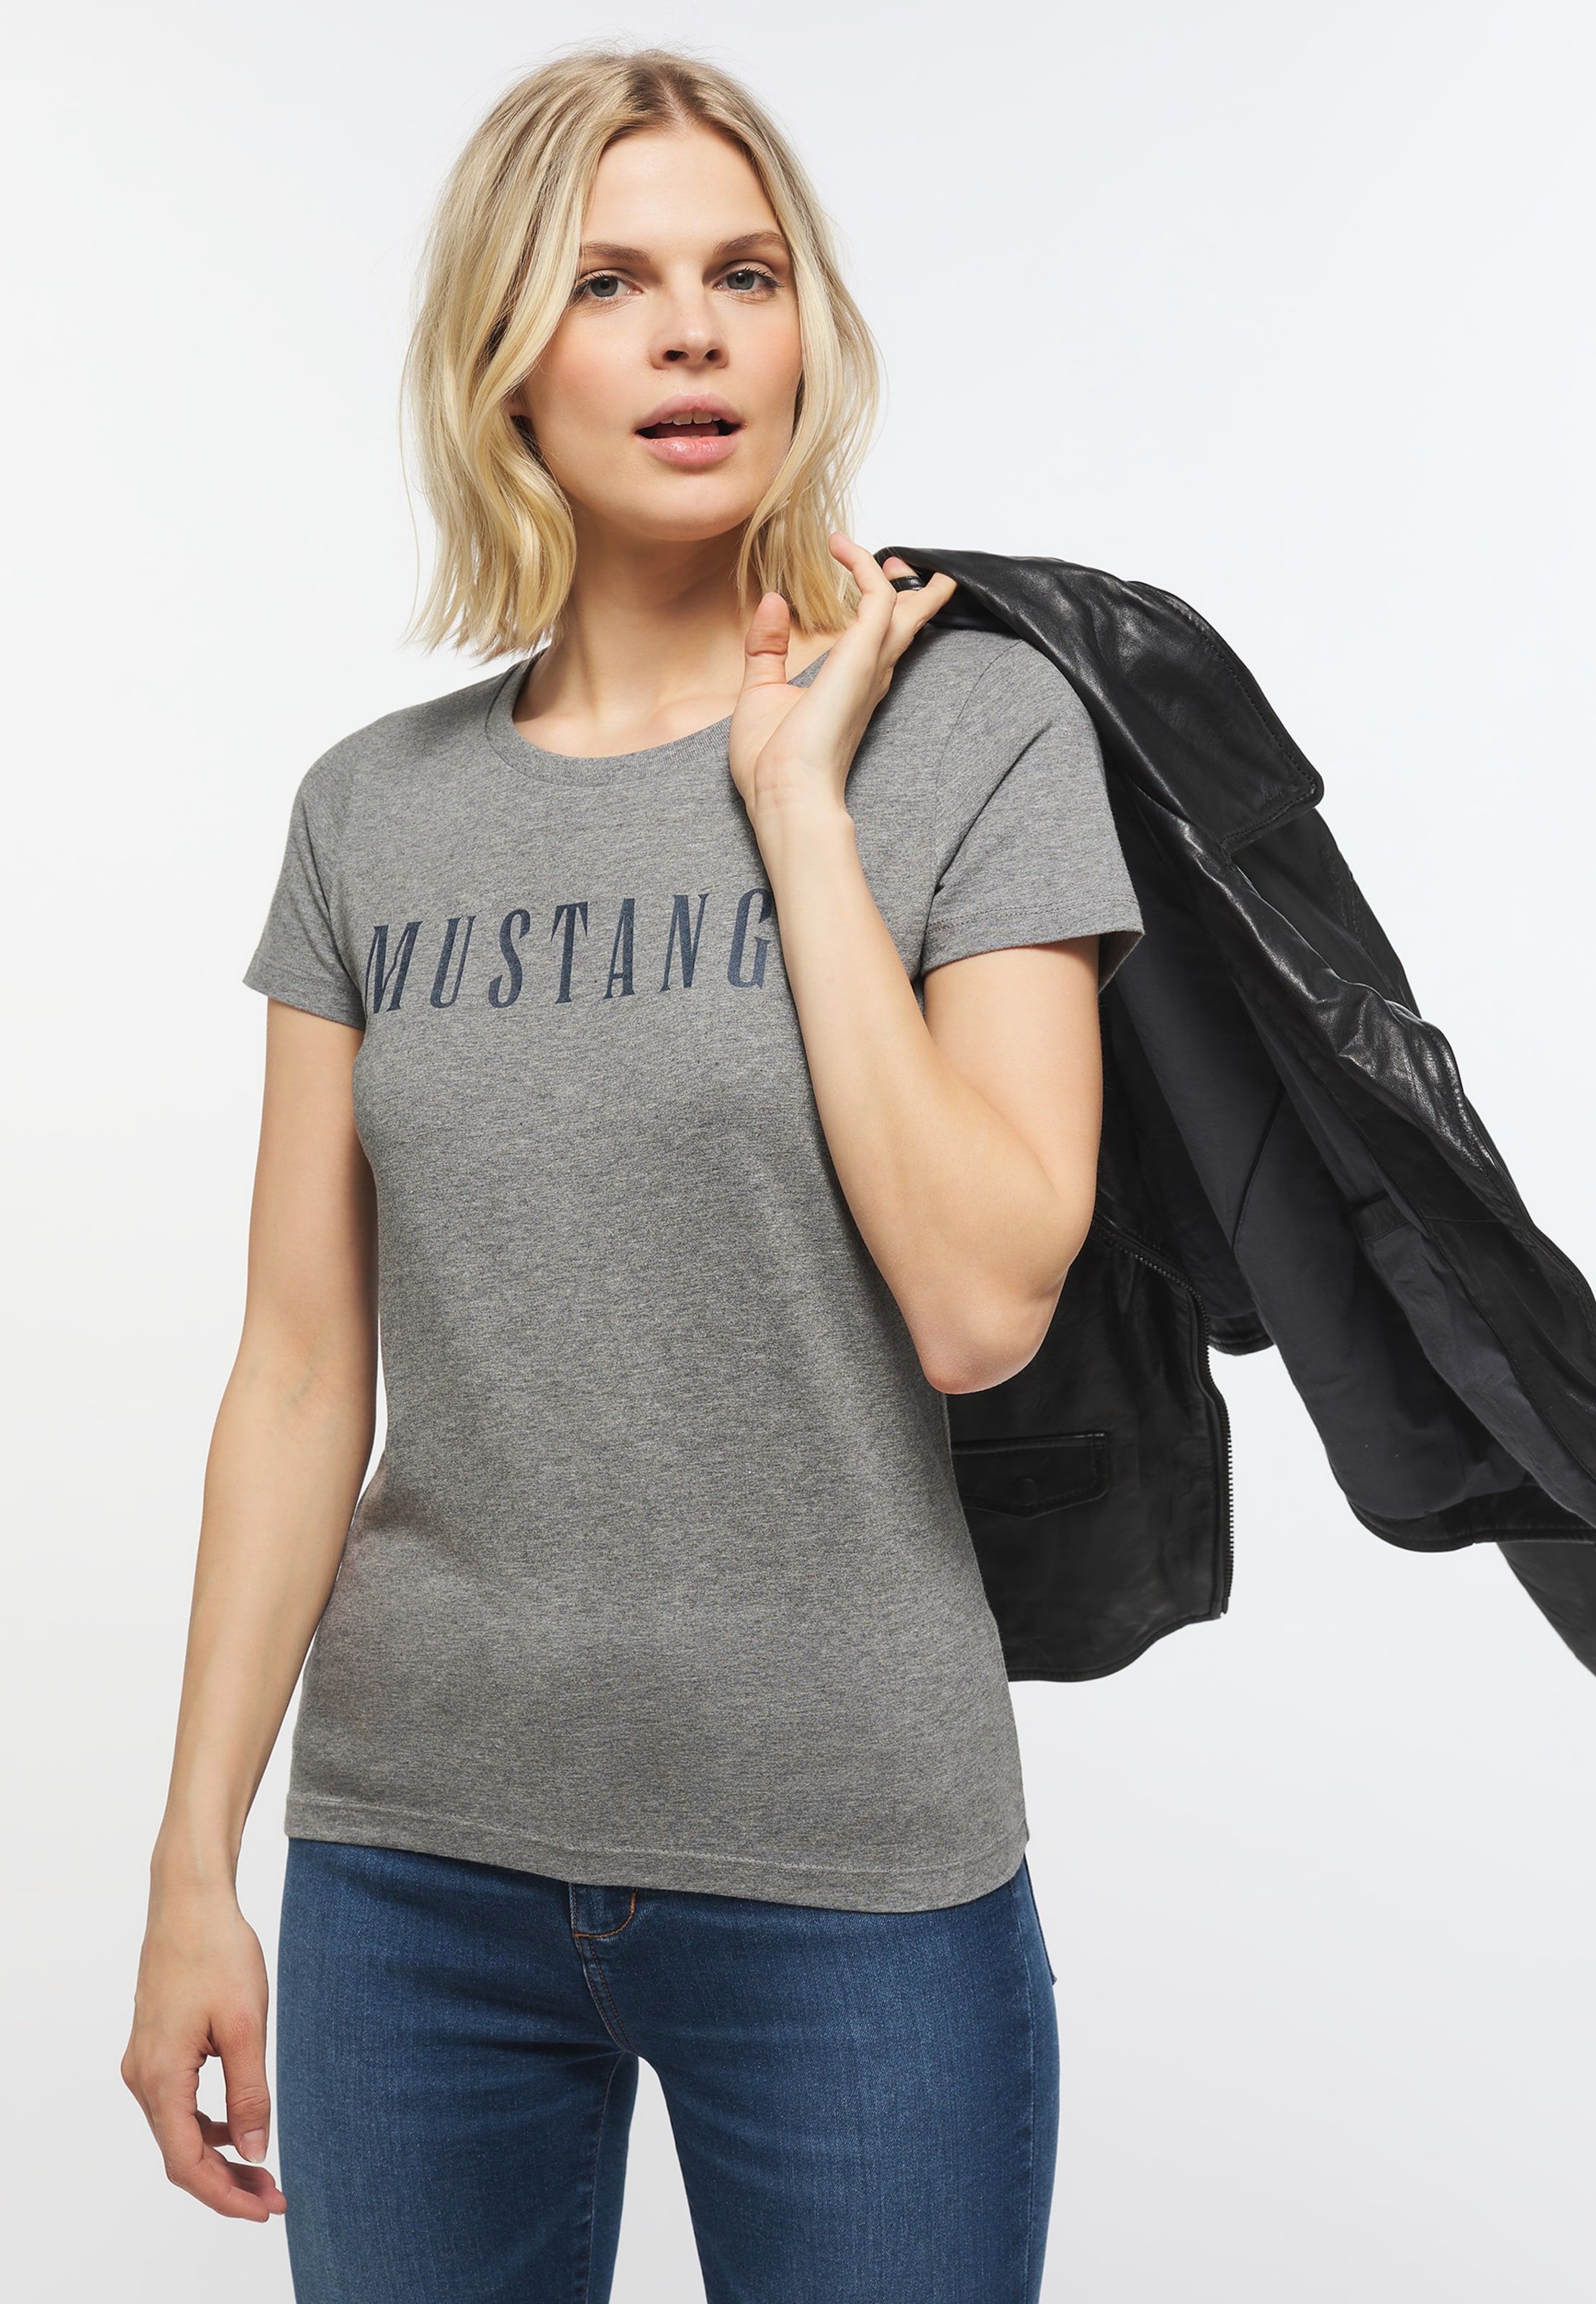 MUSTANG T-Shirt in Dunkelgrau, Graumeliert | ABOUT YOU